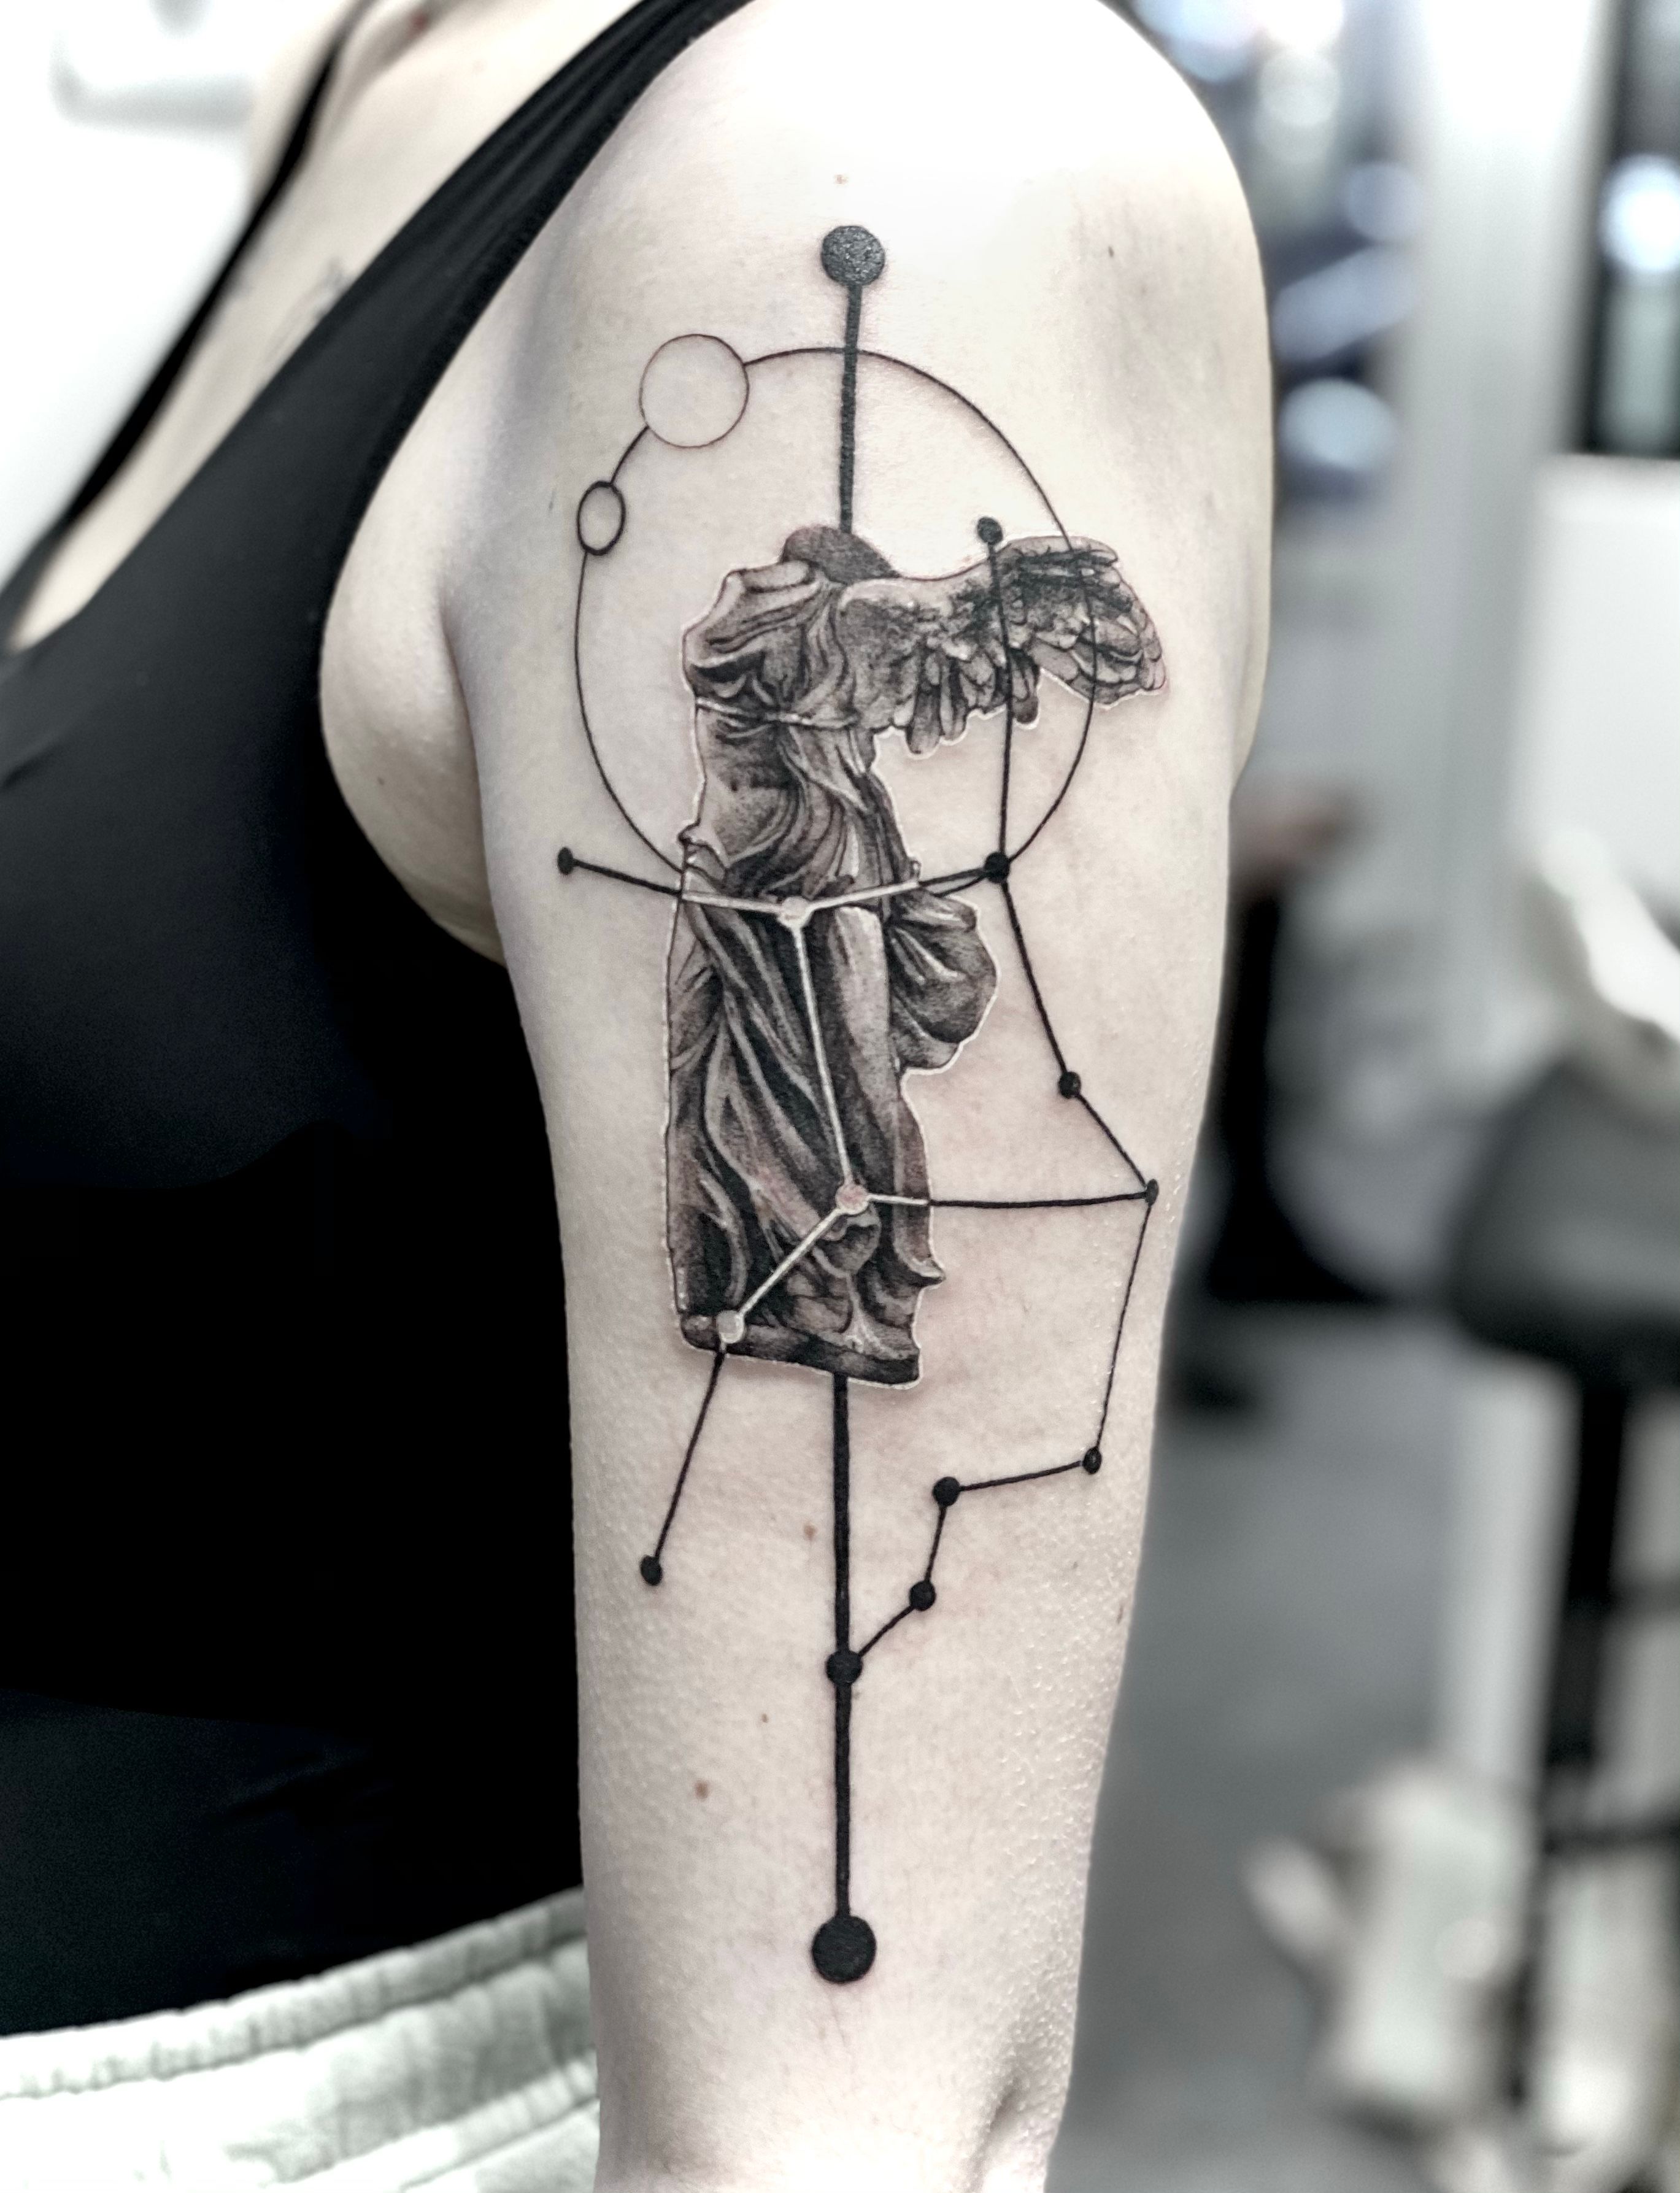 Nike - Winged Victory of Samothrace by Aura Dalian at North Main Tattoo in  Plymouth Michigan : r/tattoos